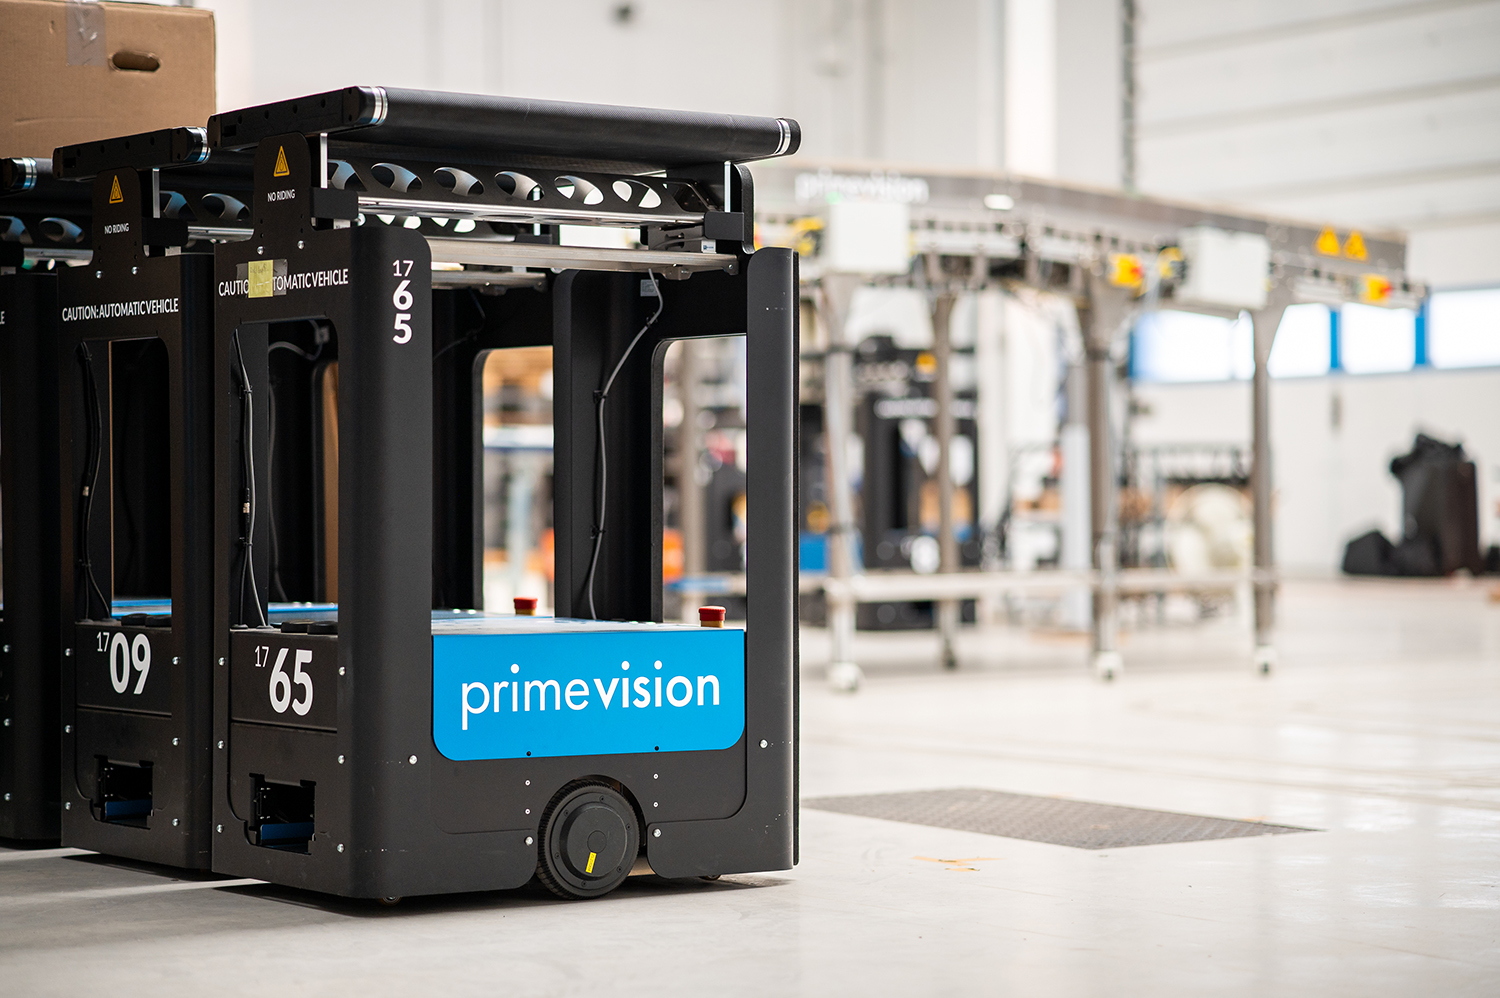 Prime Vision robots provide a scalable solution that is ideal for moving items to different areas during the sorting process.